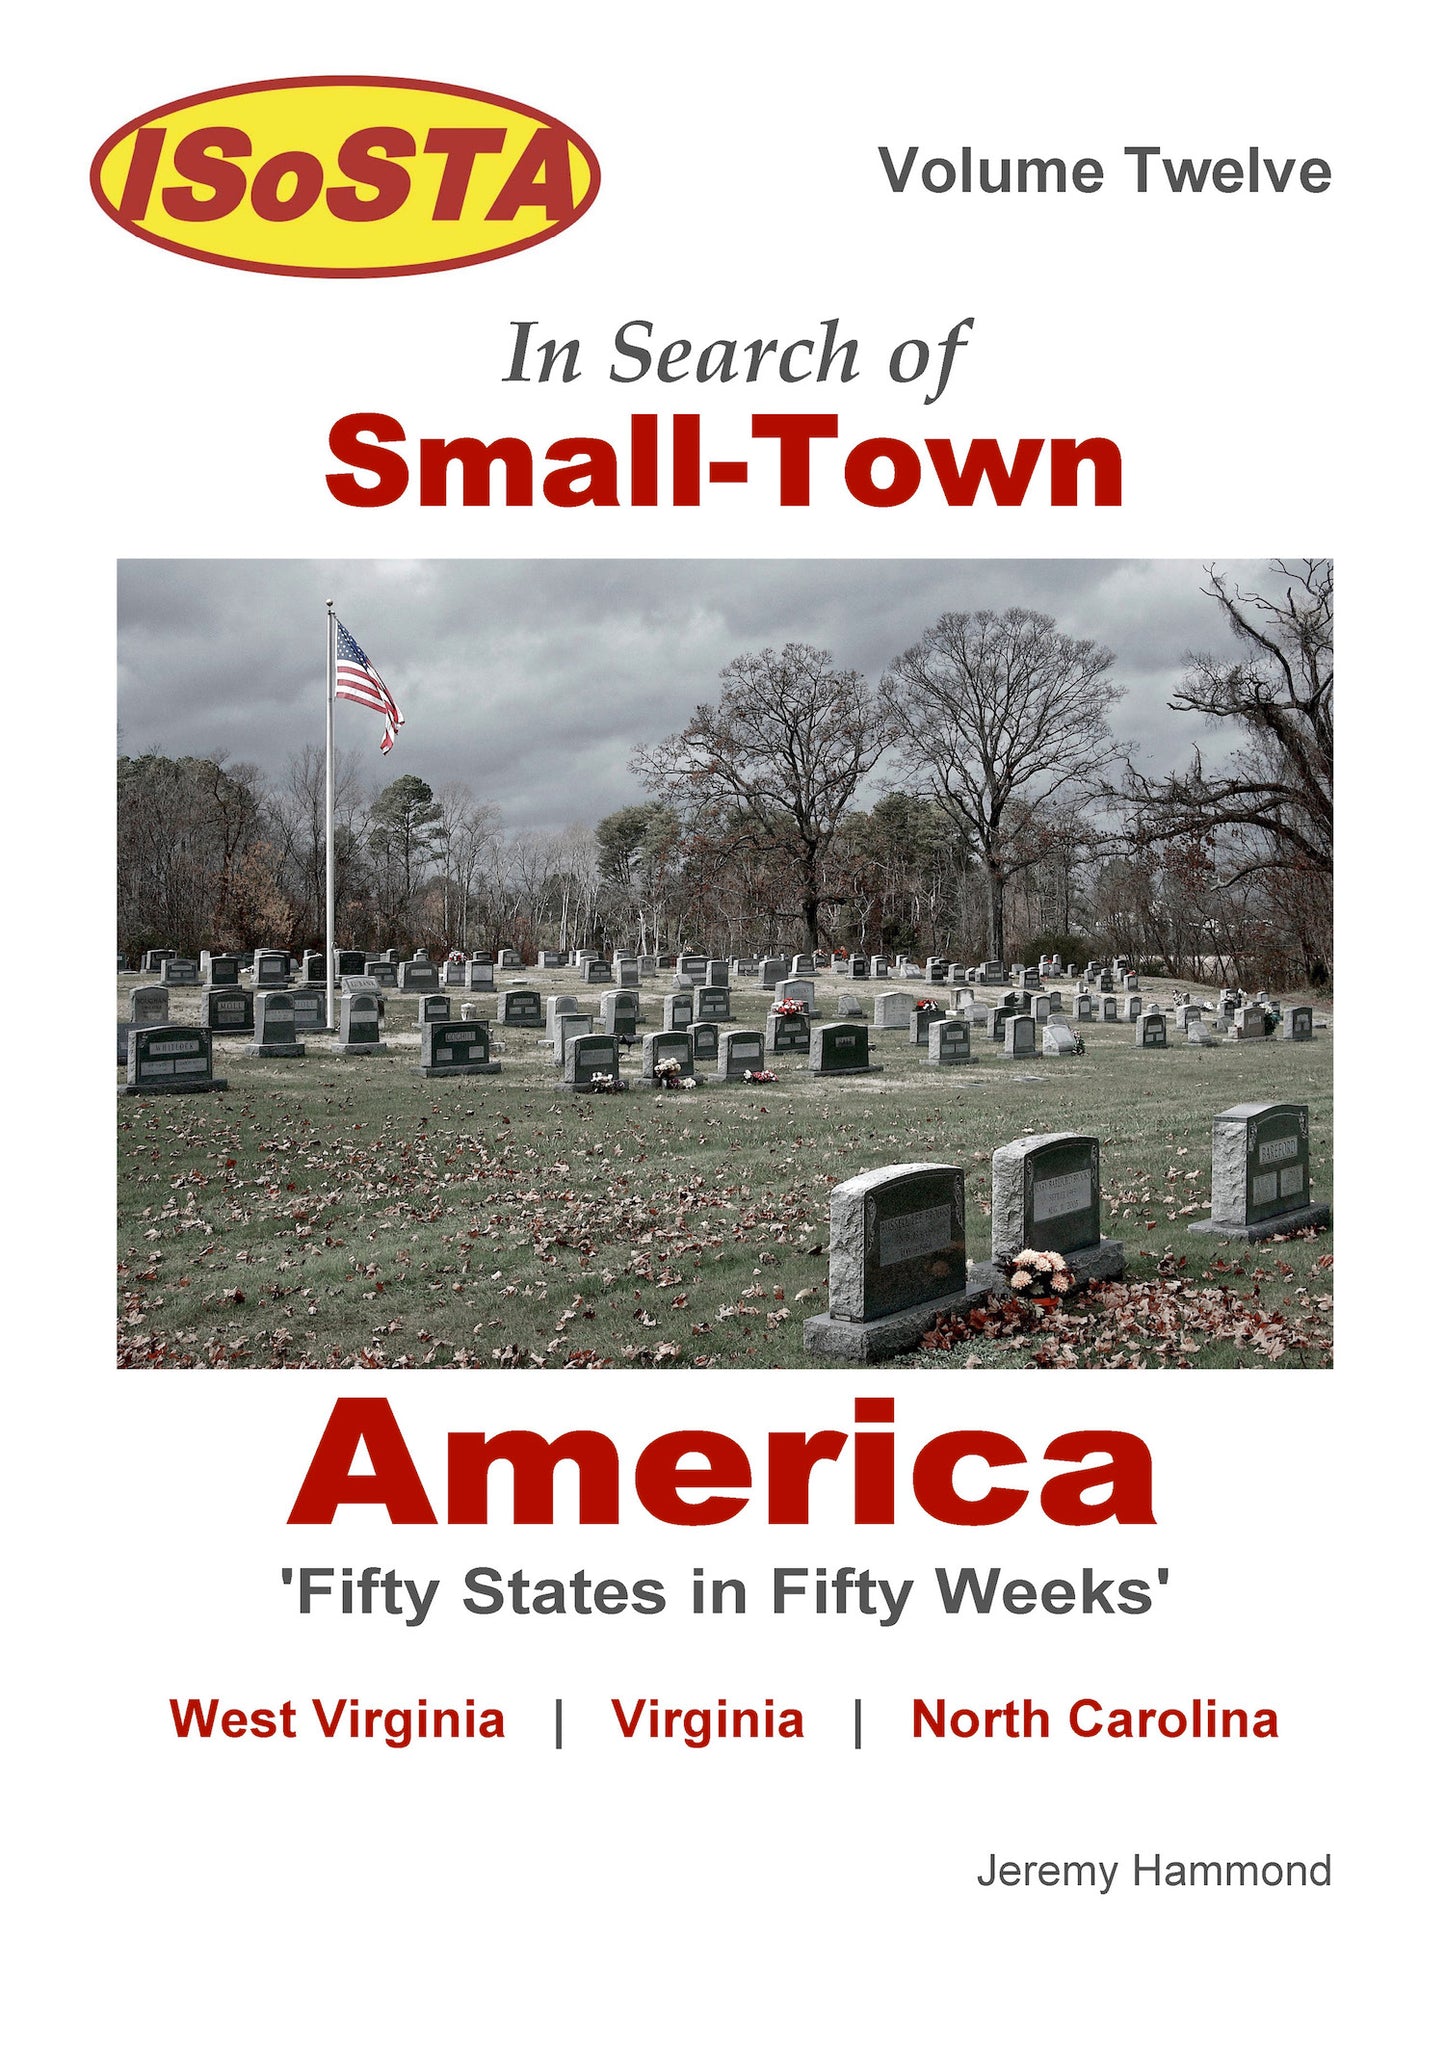 In Search of Small-Town America: Volume 12